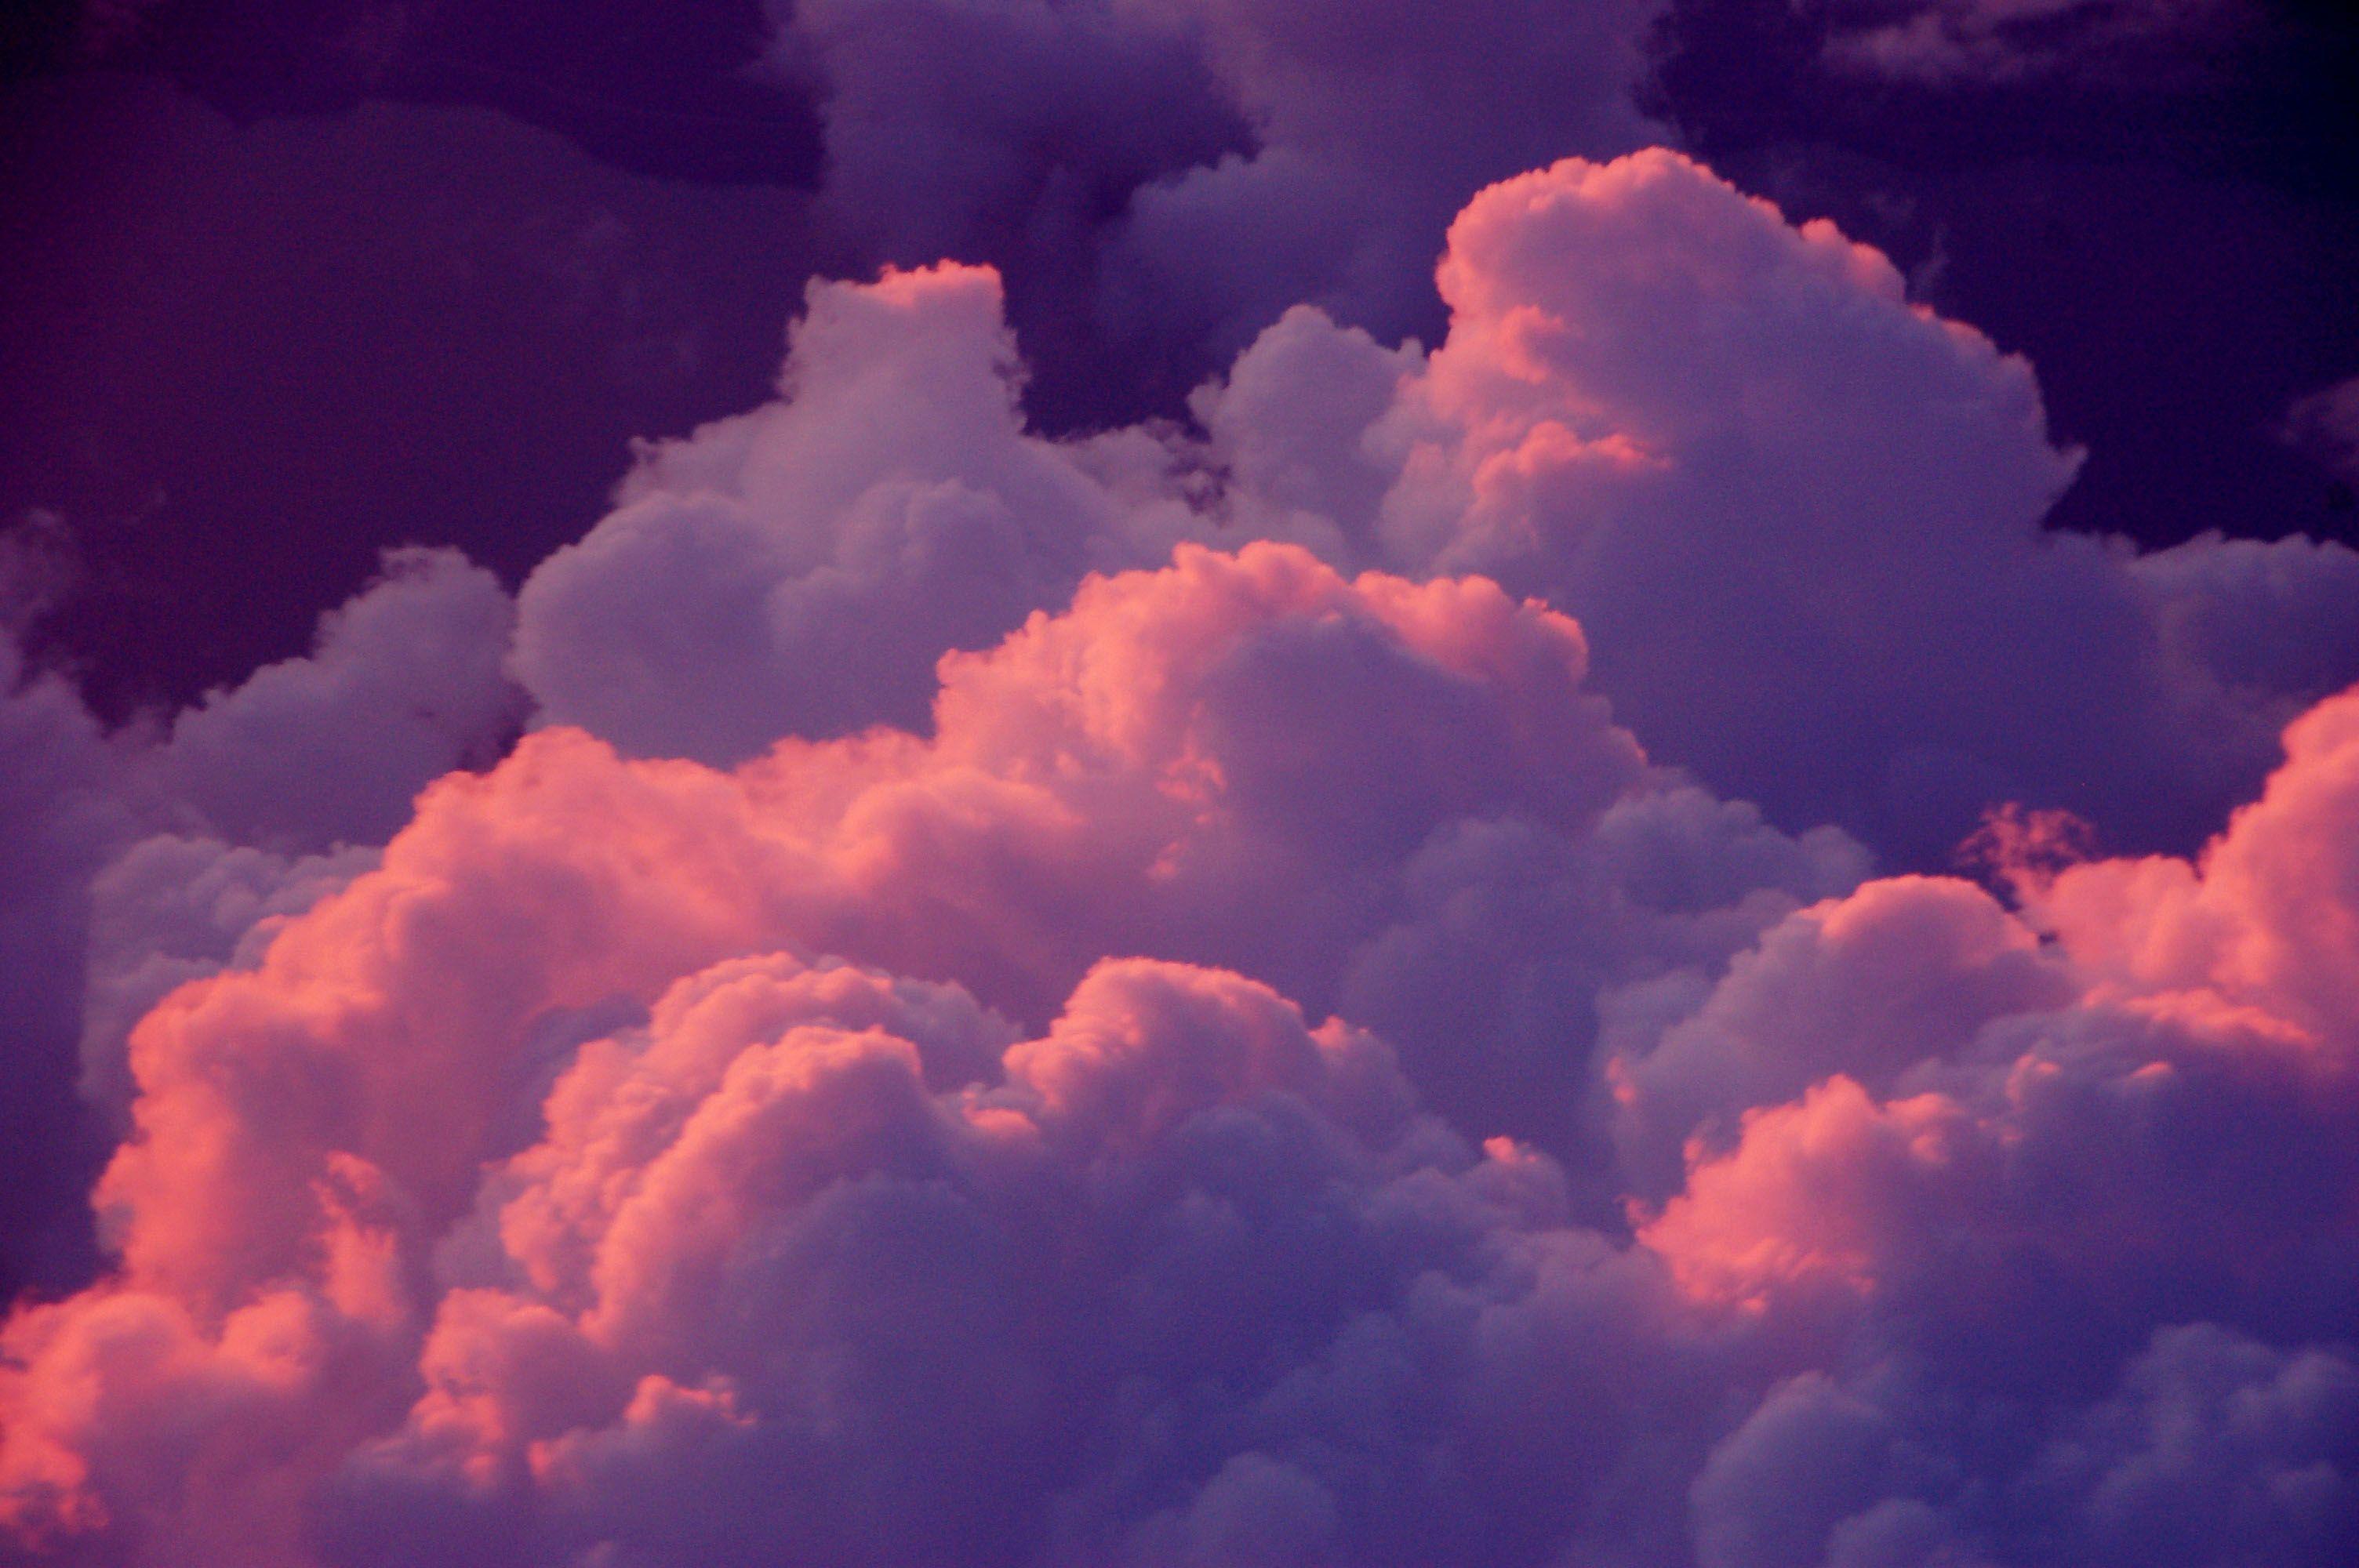 Pastel Clouds Pictures  Download Free Images on Unsplash